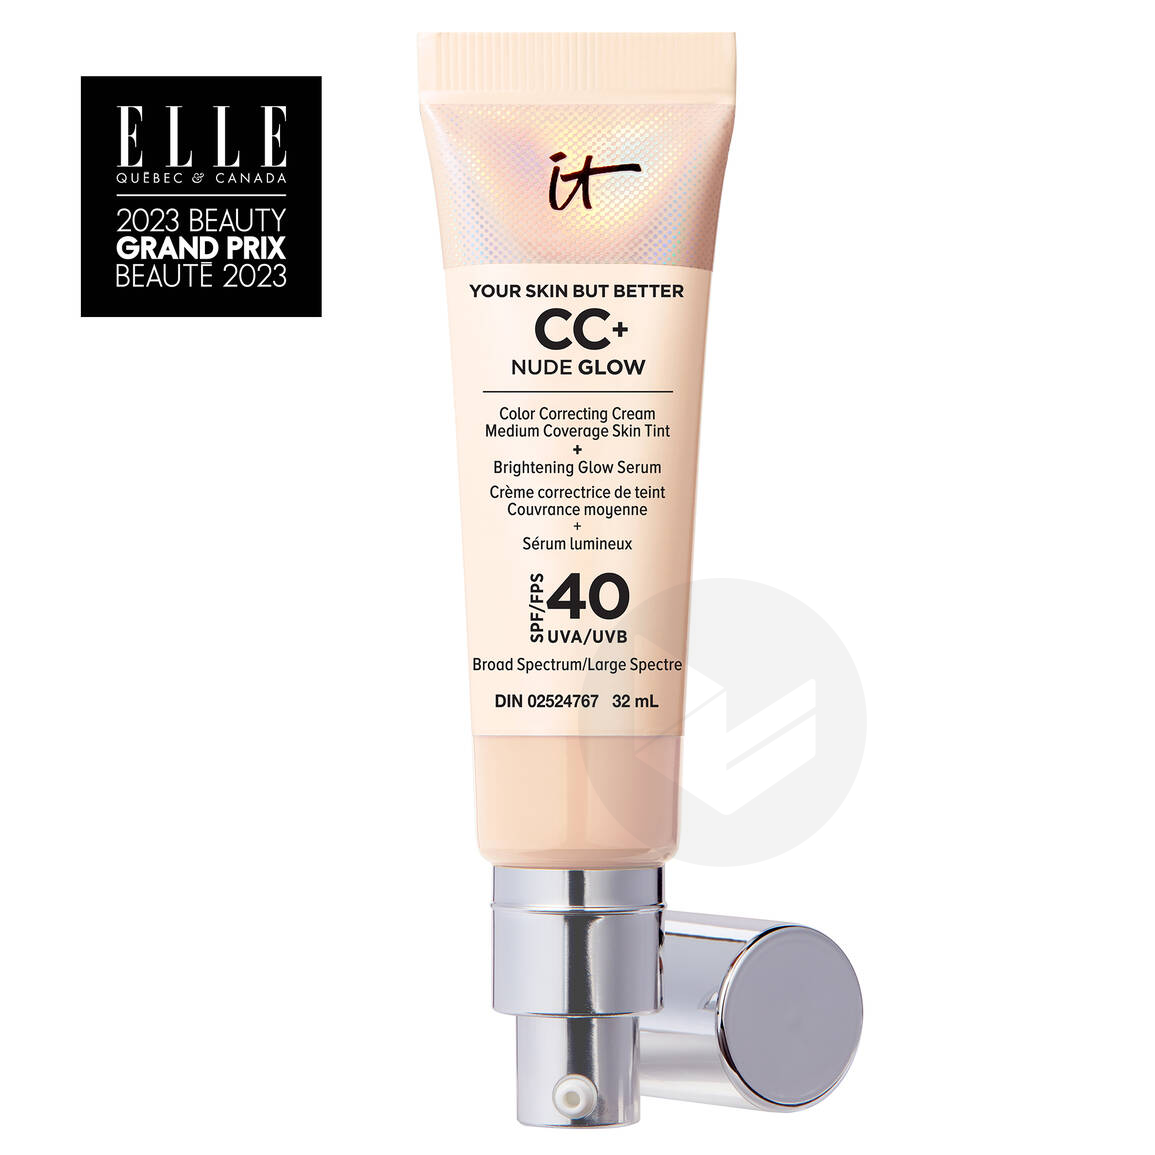 Your Skin But Better CC+ Nude Glow SPF40 Light 32ml